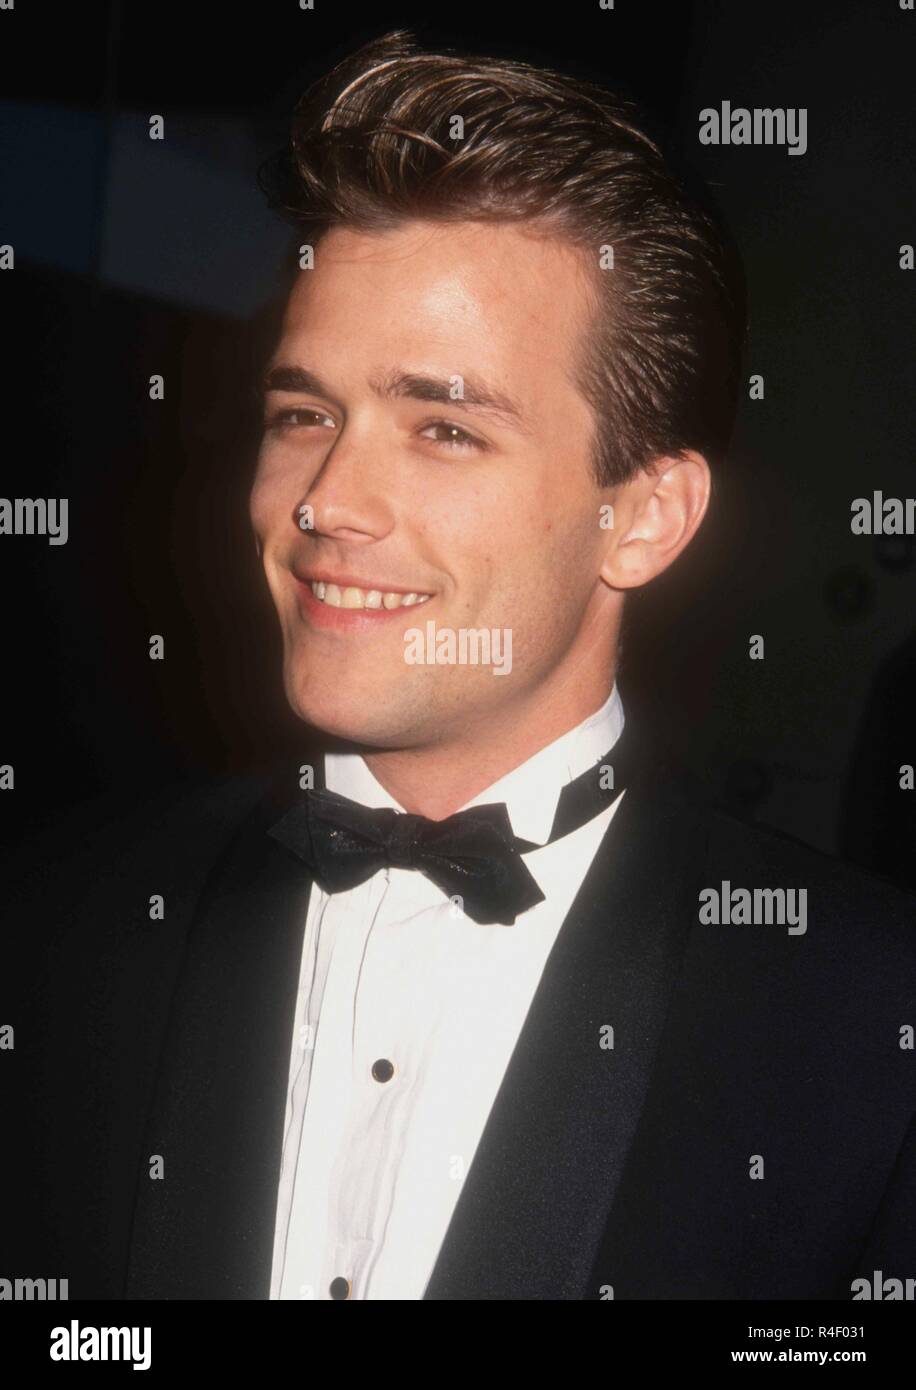 BEVERLY HILLS, CA - FEBRUARY 26: Actor Scott Reeves attends the Ninth Annual Soap Opera Digest Awards on February 26, 1993 at the Beverly Hilton Hotel in Beverly Hills, California. Photo by Barry King/Alamy Stock Photo Stock Photo